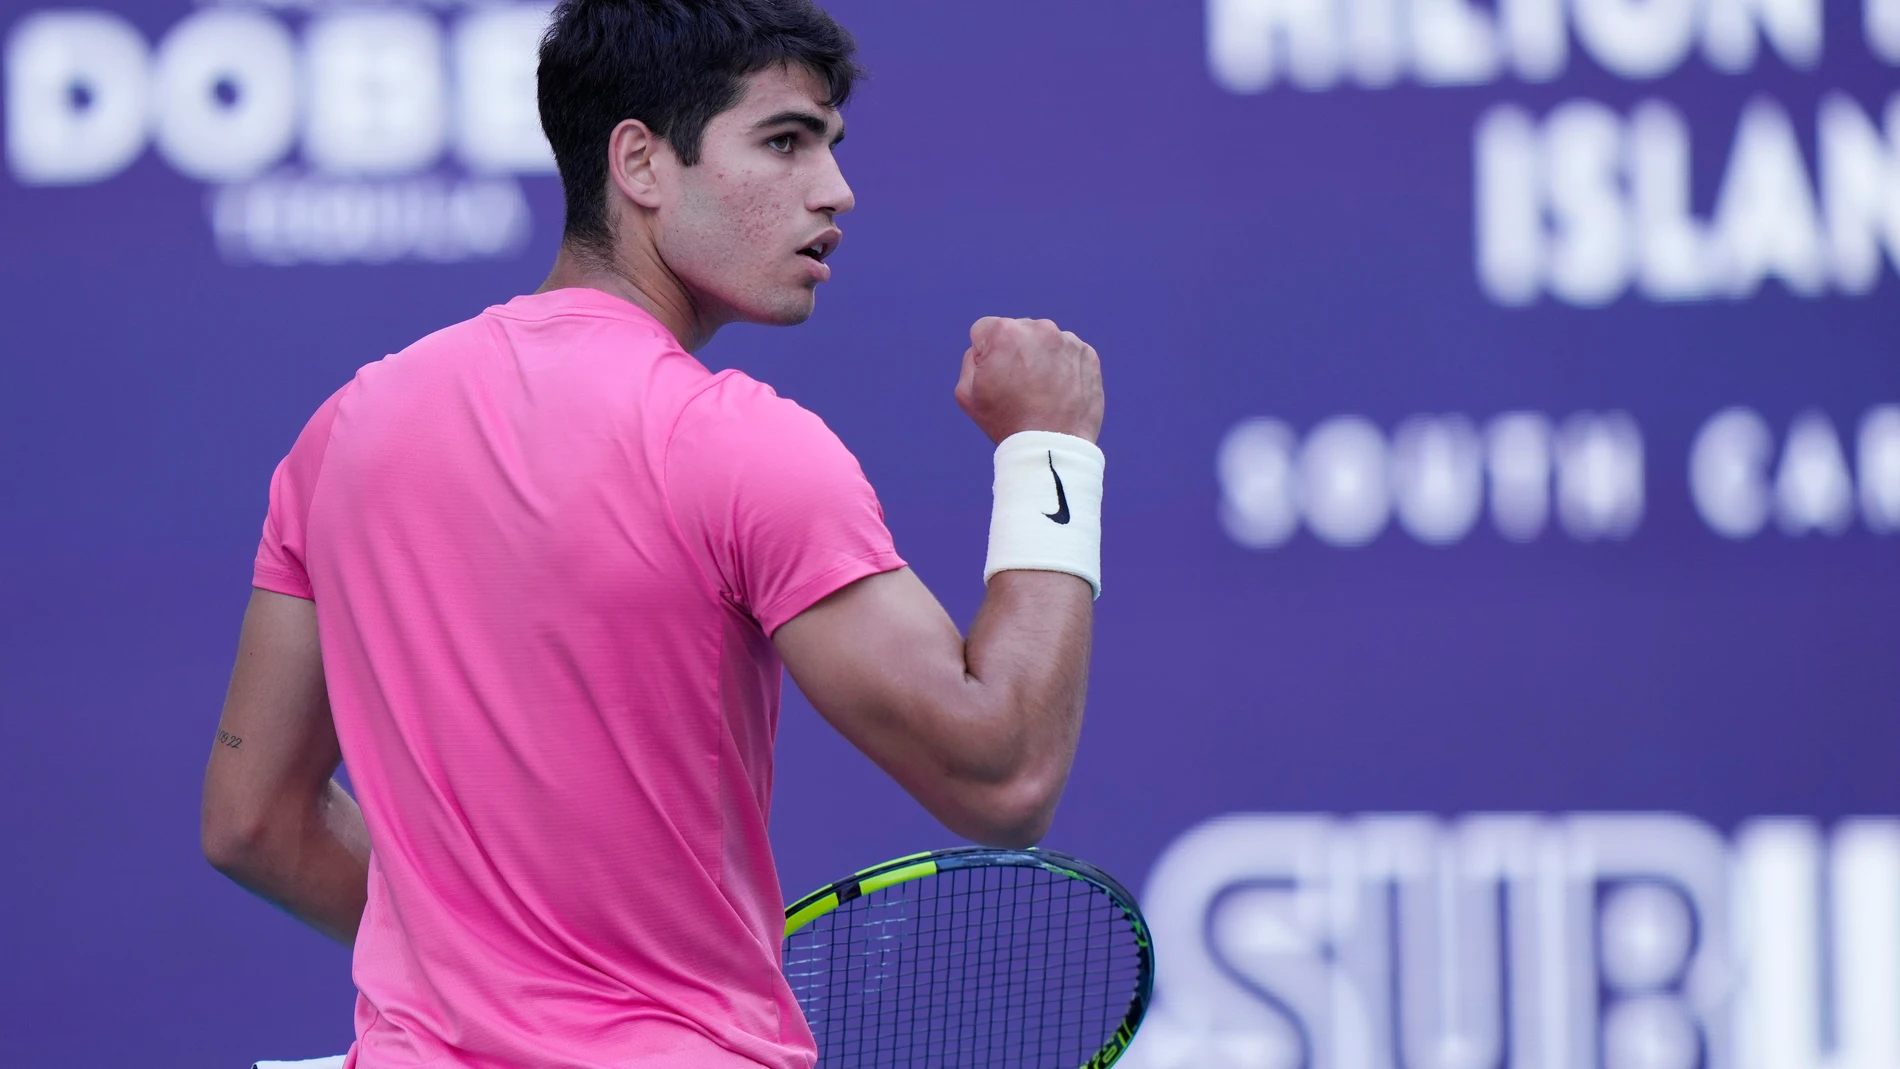 Carlos Alcaraz, of Spain, celebrates a point against Facundo Bagnis, of Argentina, during the Miami Open tennis tournament, Friday, March 24, 2023, in Miami Gardens, Fla. (AP Photo/Wilfredo Lee)